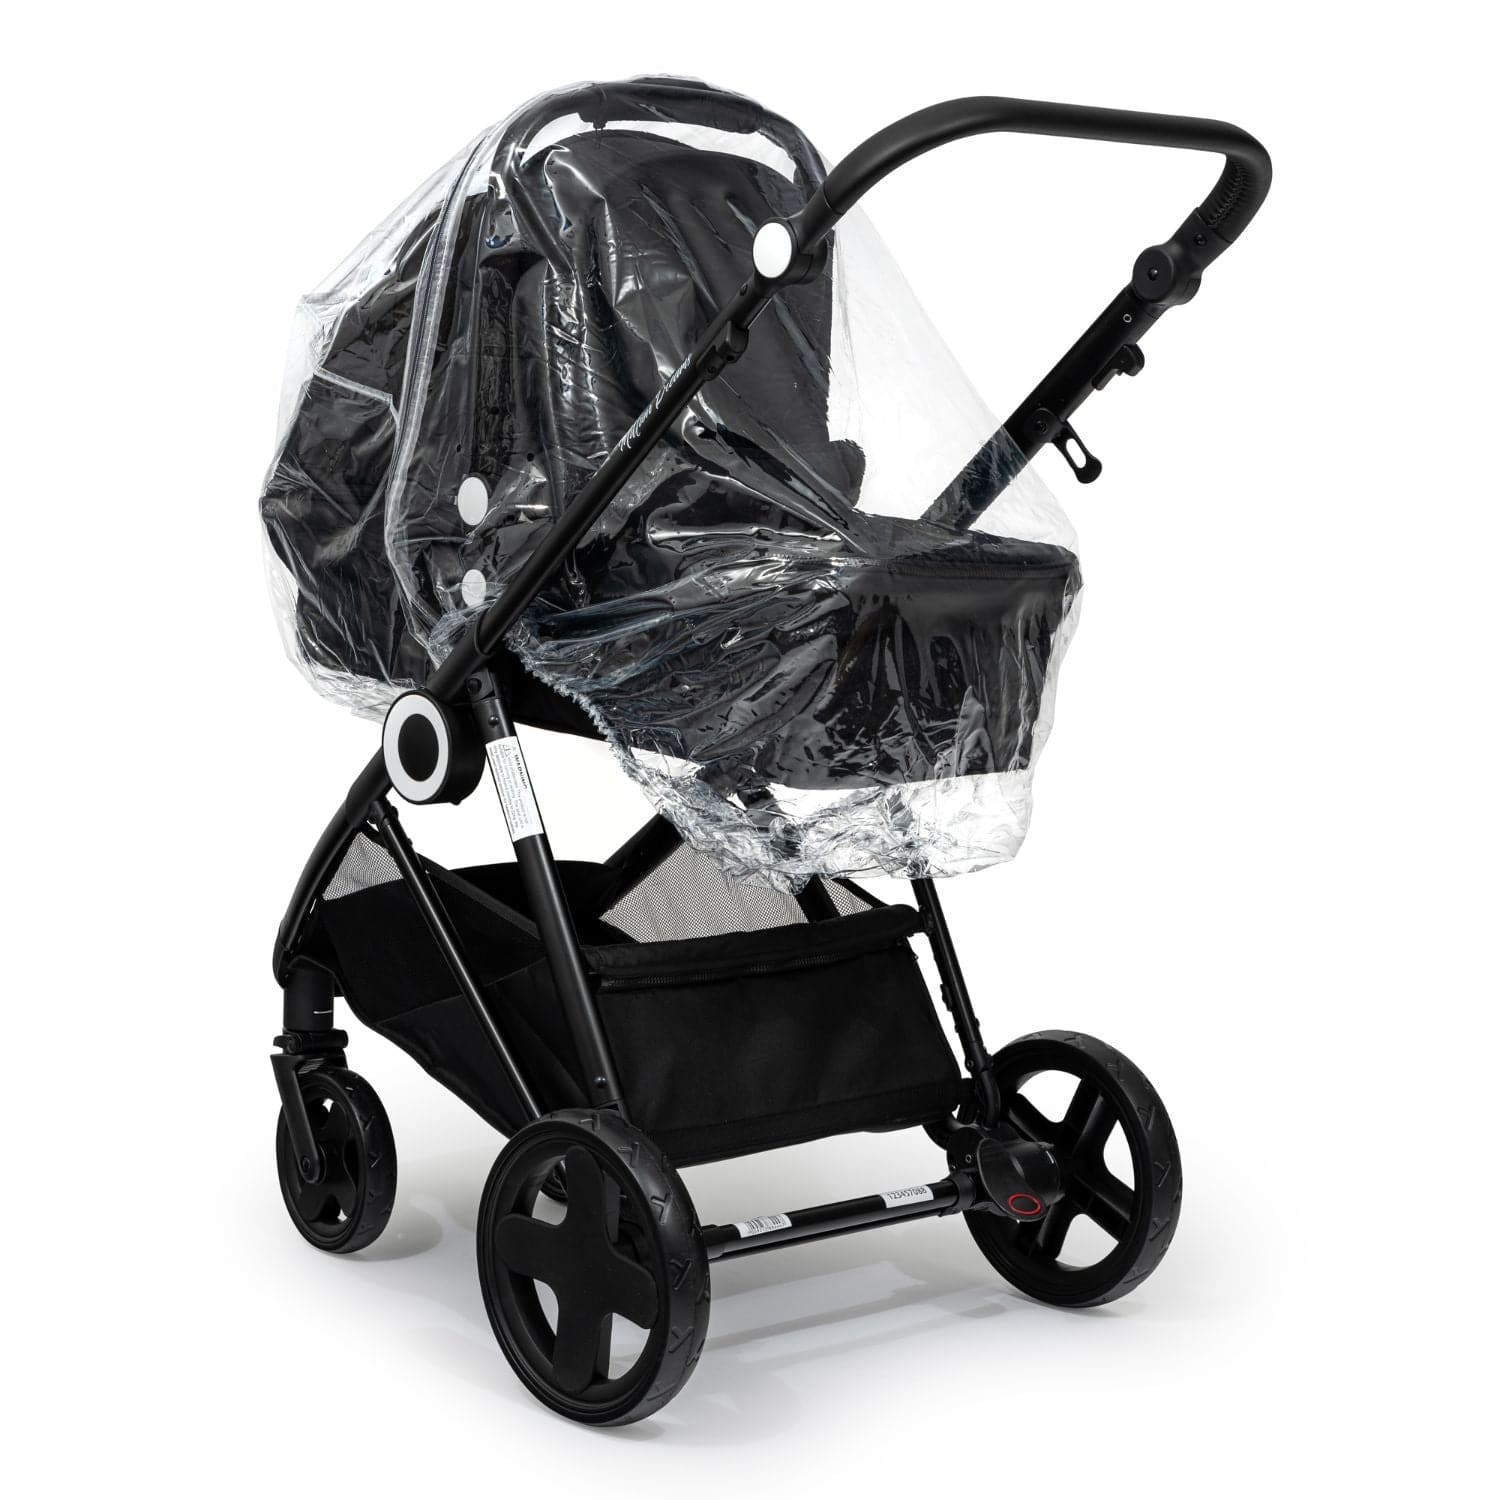 Carrycot Raincover Compatible With Hybrid - Fits All Models - For Your Little One